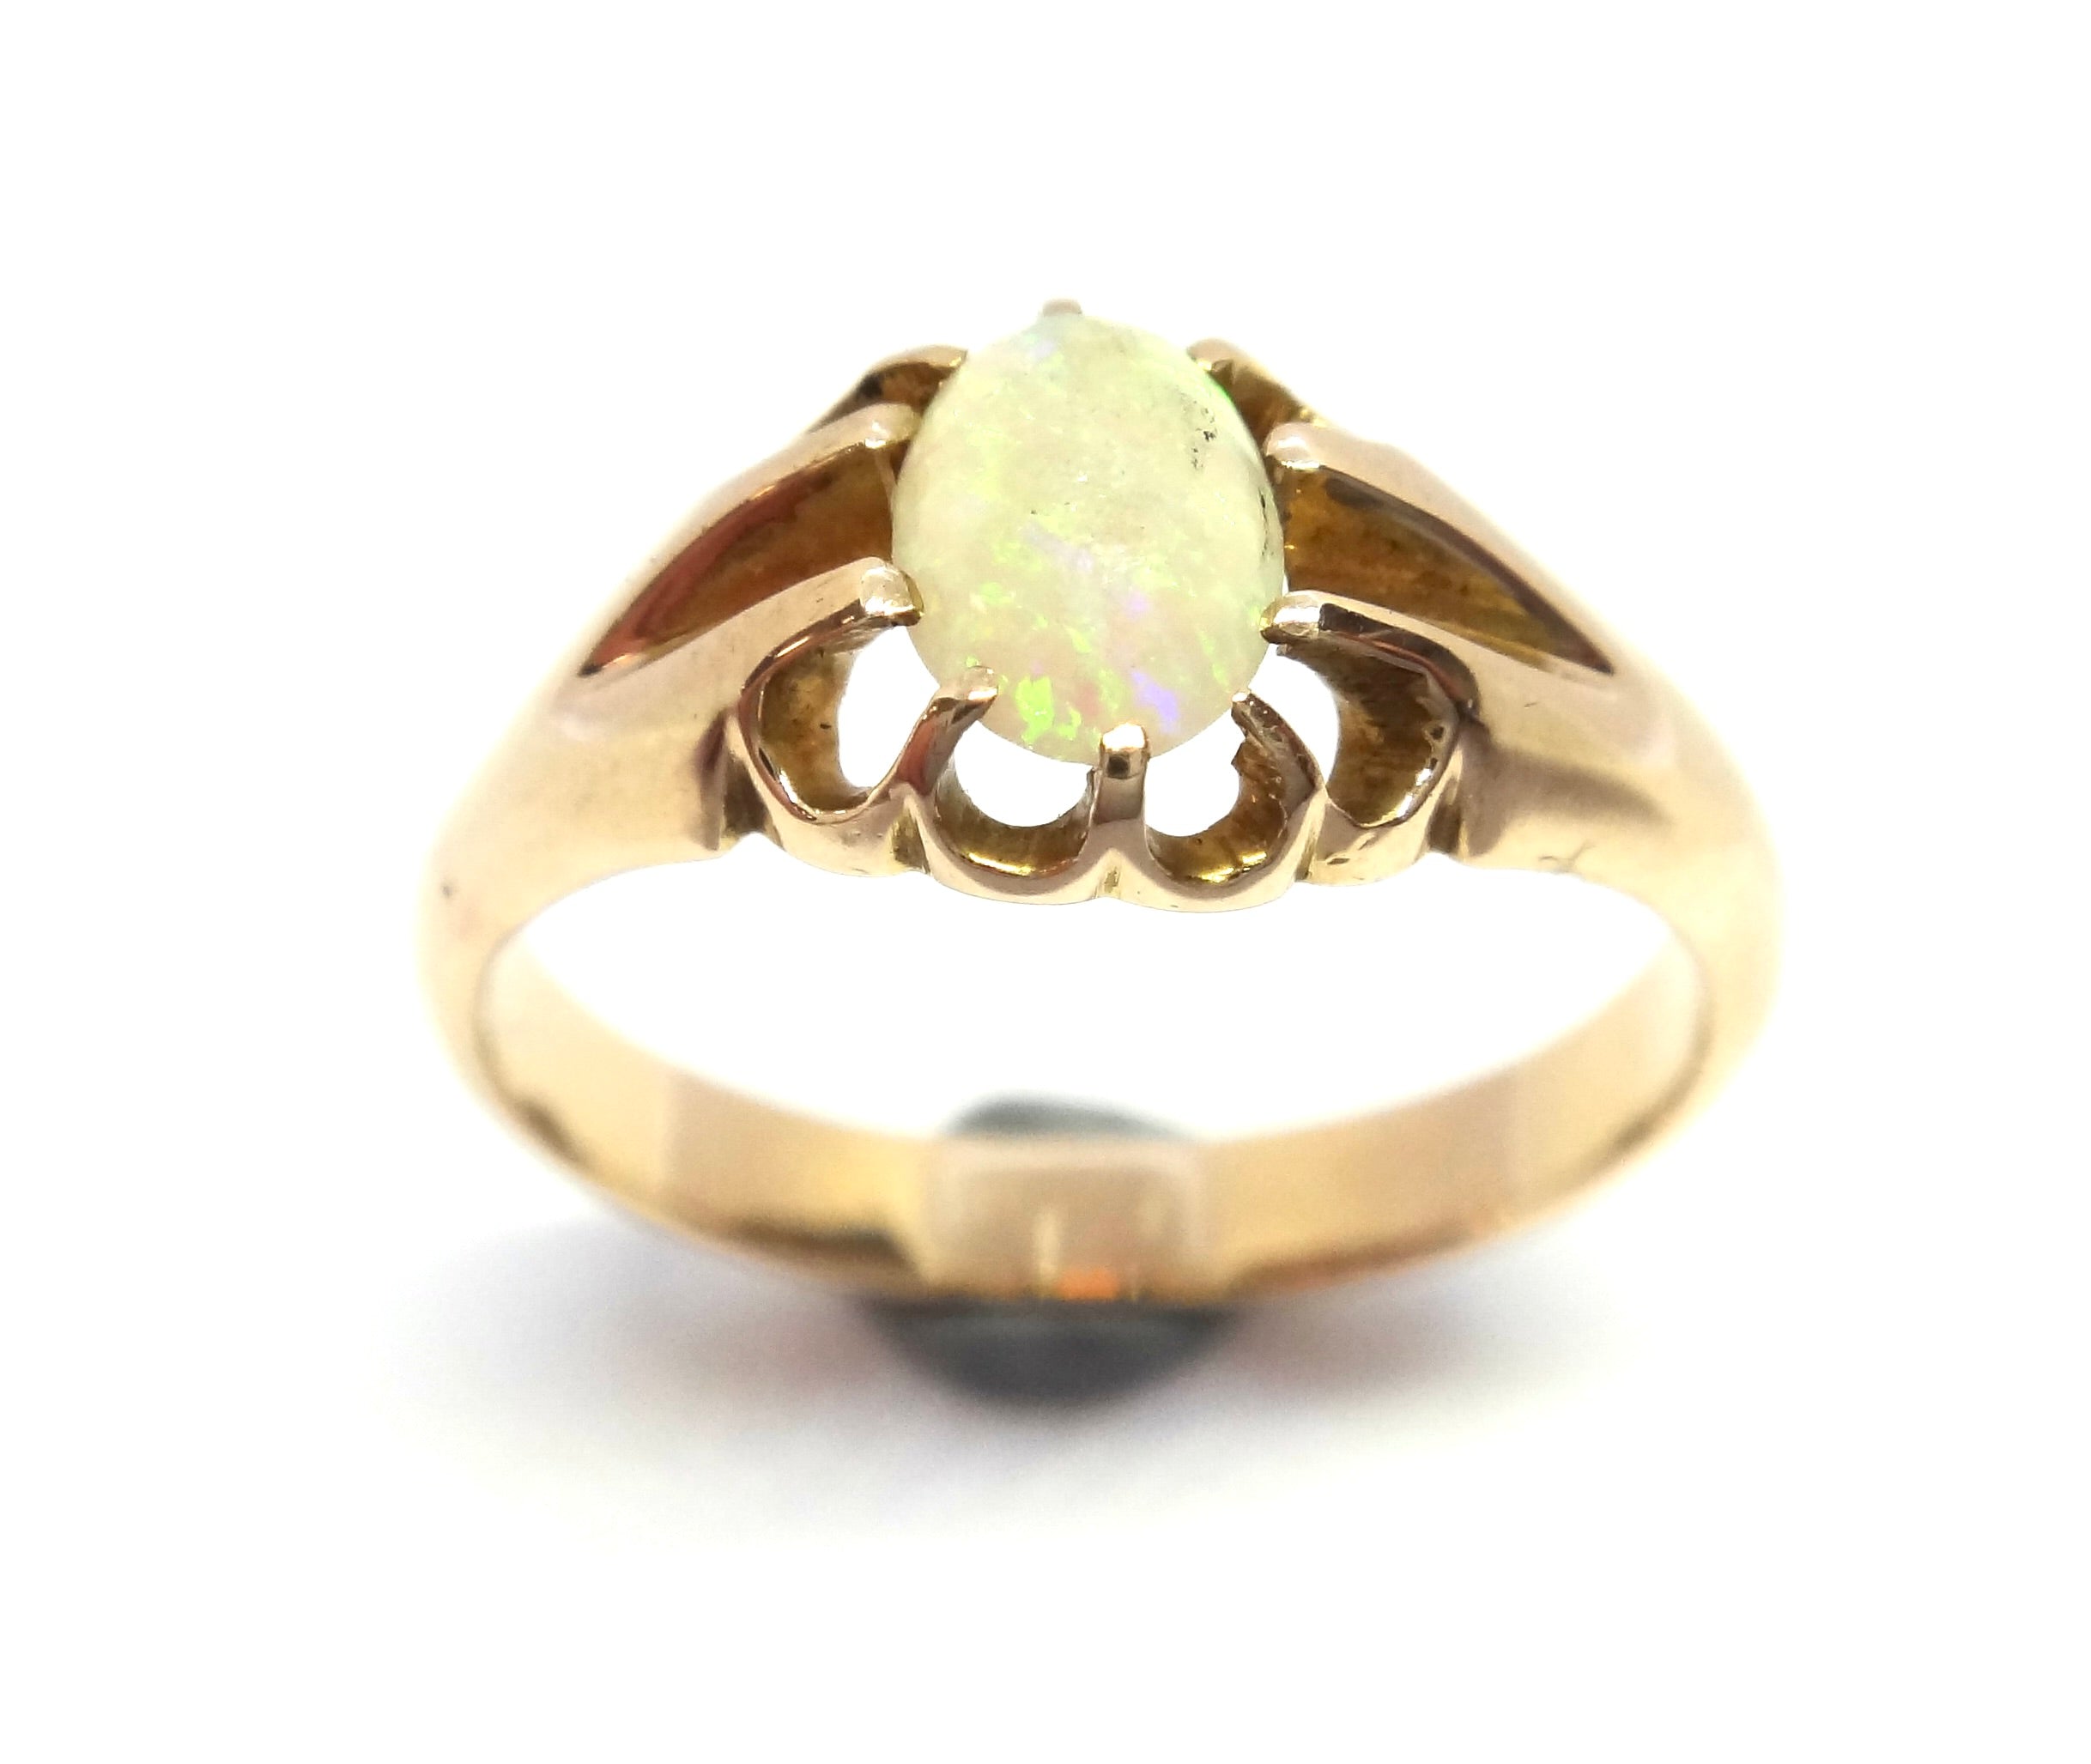 ANTIQUE 9ct Yellow Gold & White OPAL Ring c.1900